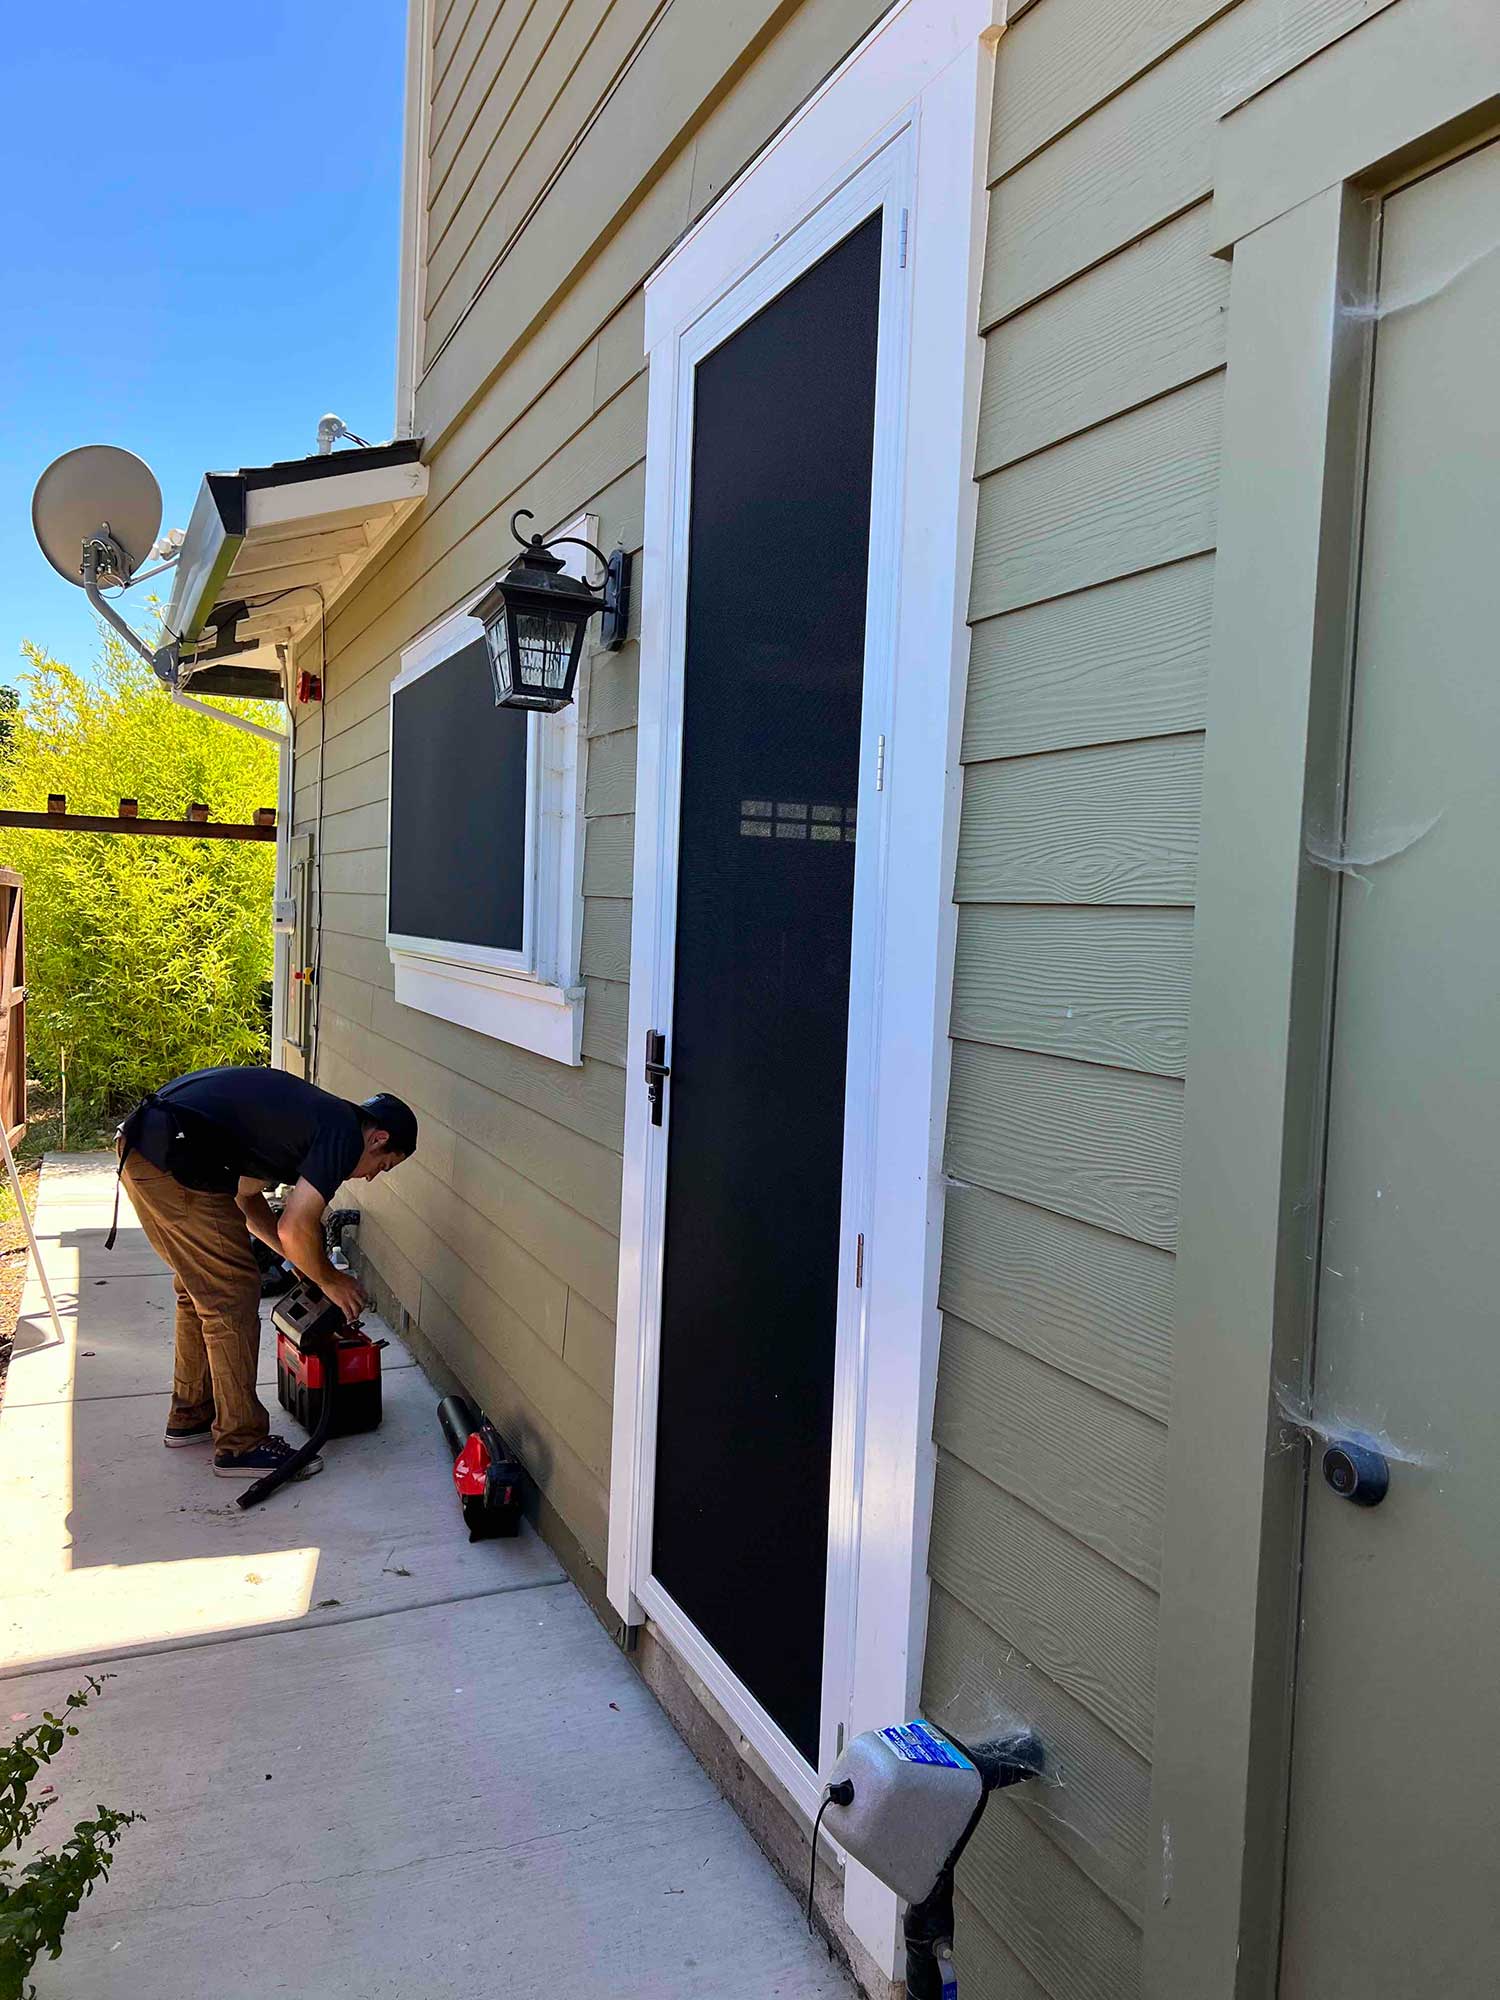 Crimsafe Security screen doors added to this Middletown, CA home by ClimatePro